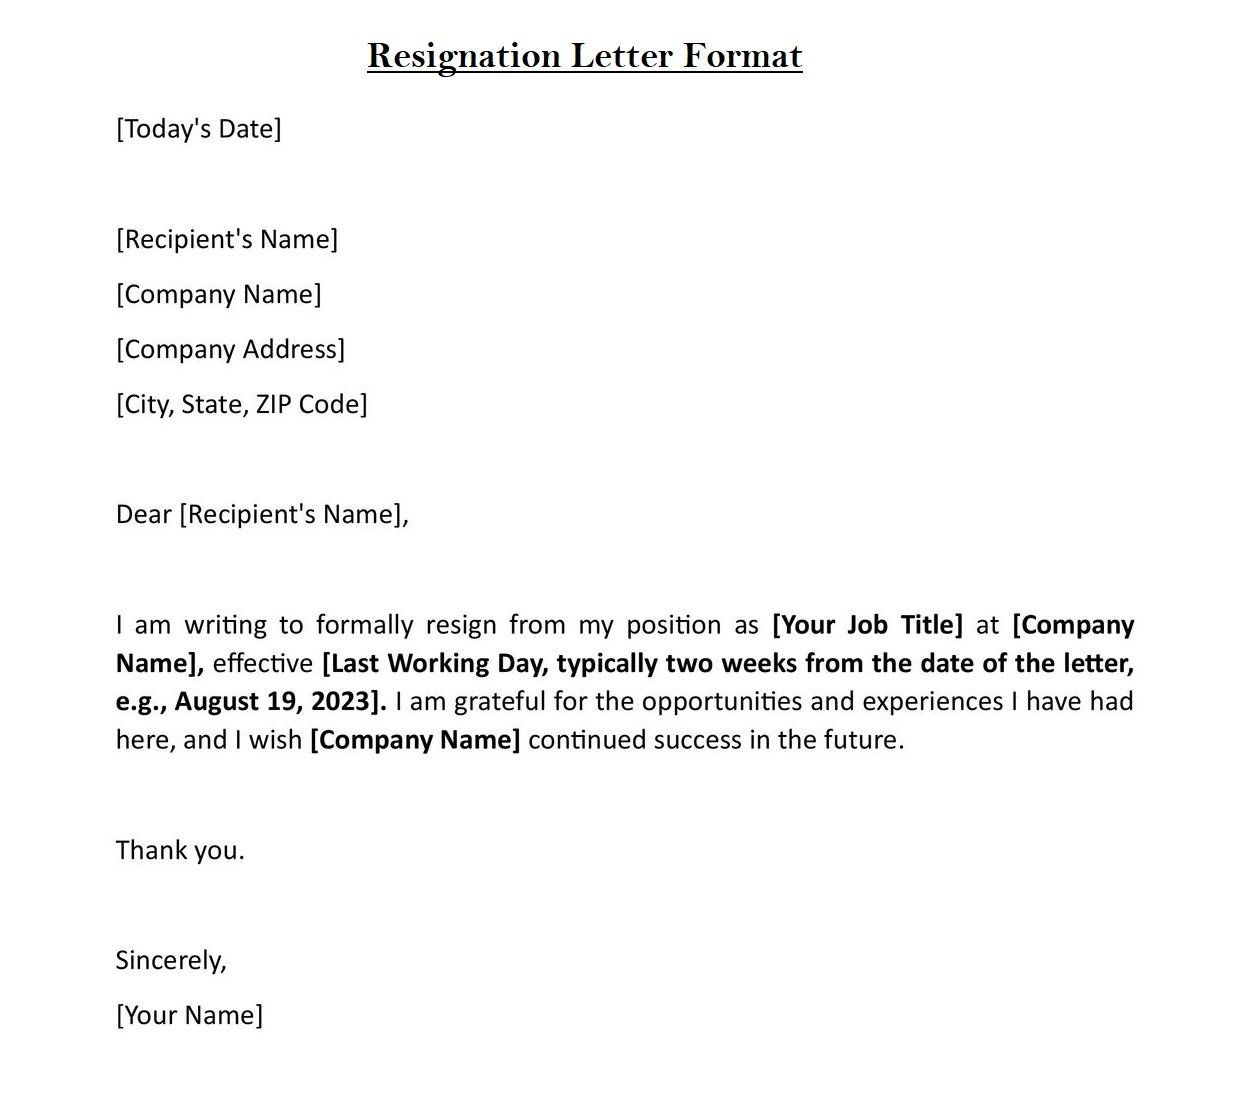 Resignation Letter Format (Download in Word)